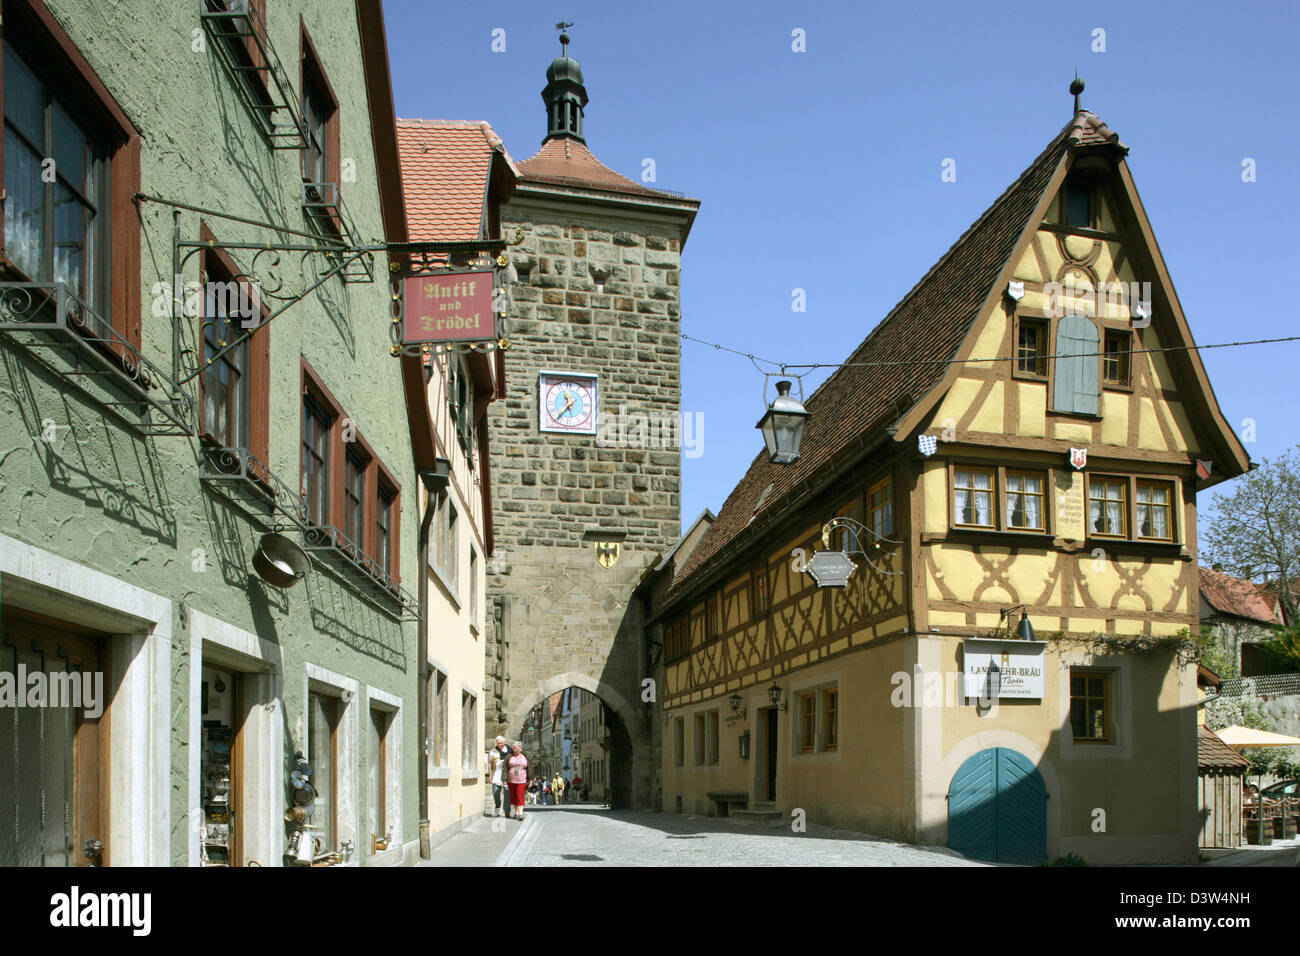 The picture shows the Siebers tower (C) in the medieval town of Rothenburg ob der Tauber Germany, 01 June  2006. Photo: Friedel Gierth Stock Photo